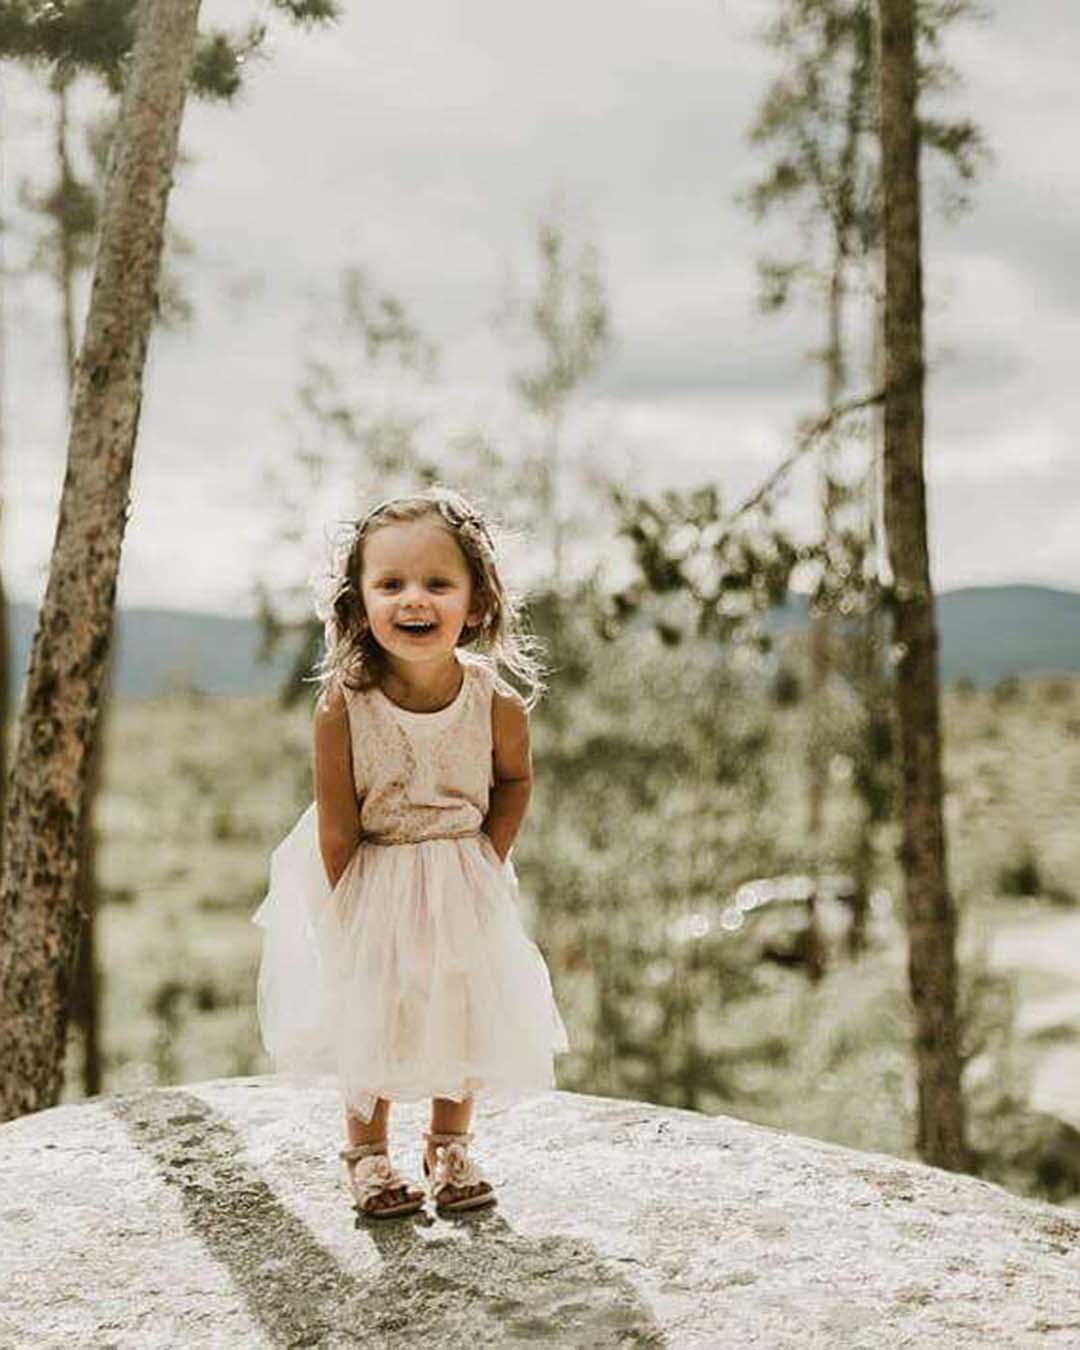 flower girl and ring bearer photo cute kateivyphotography